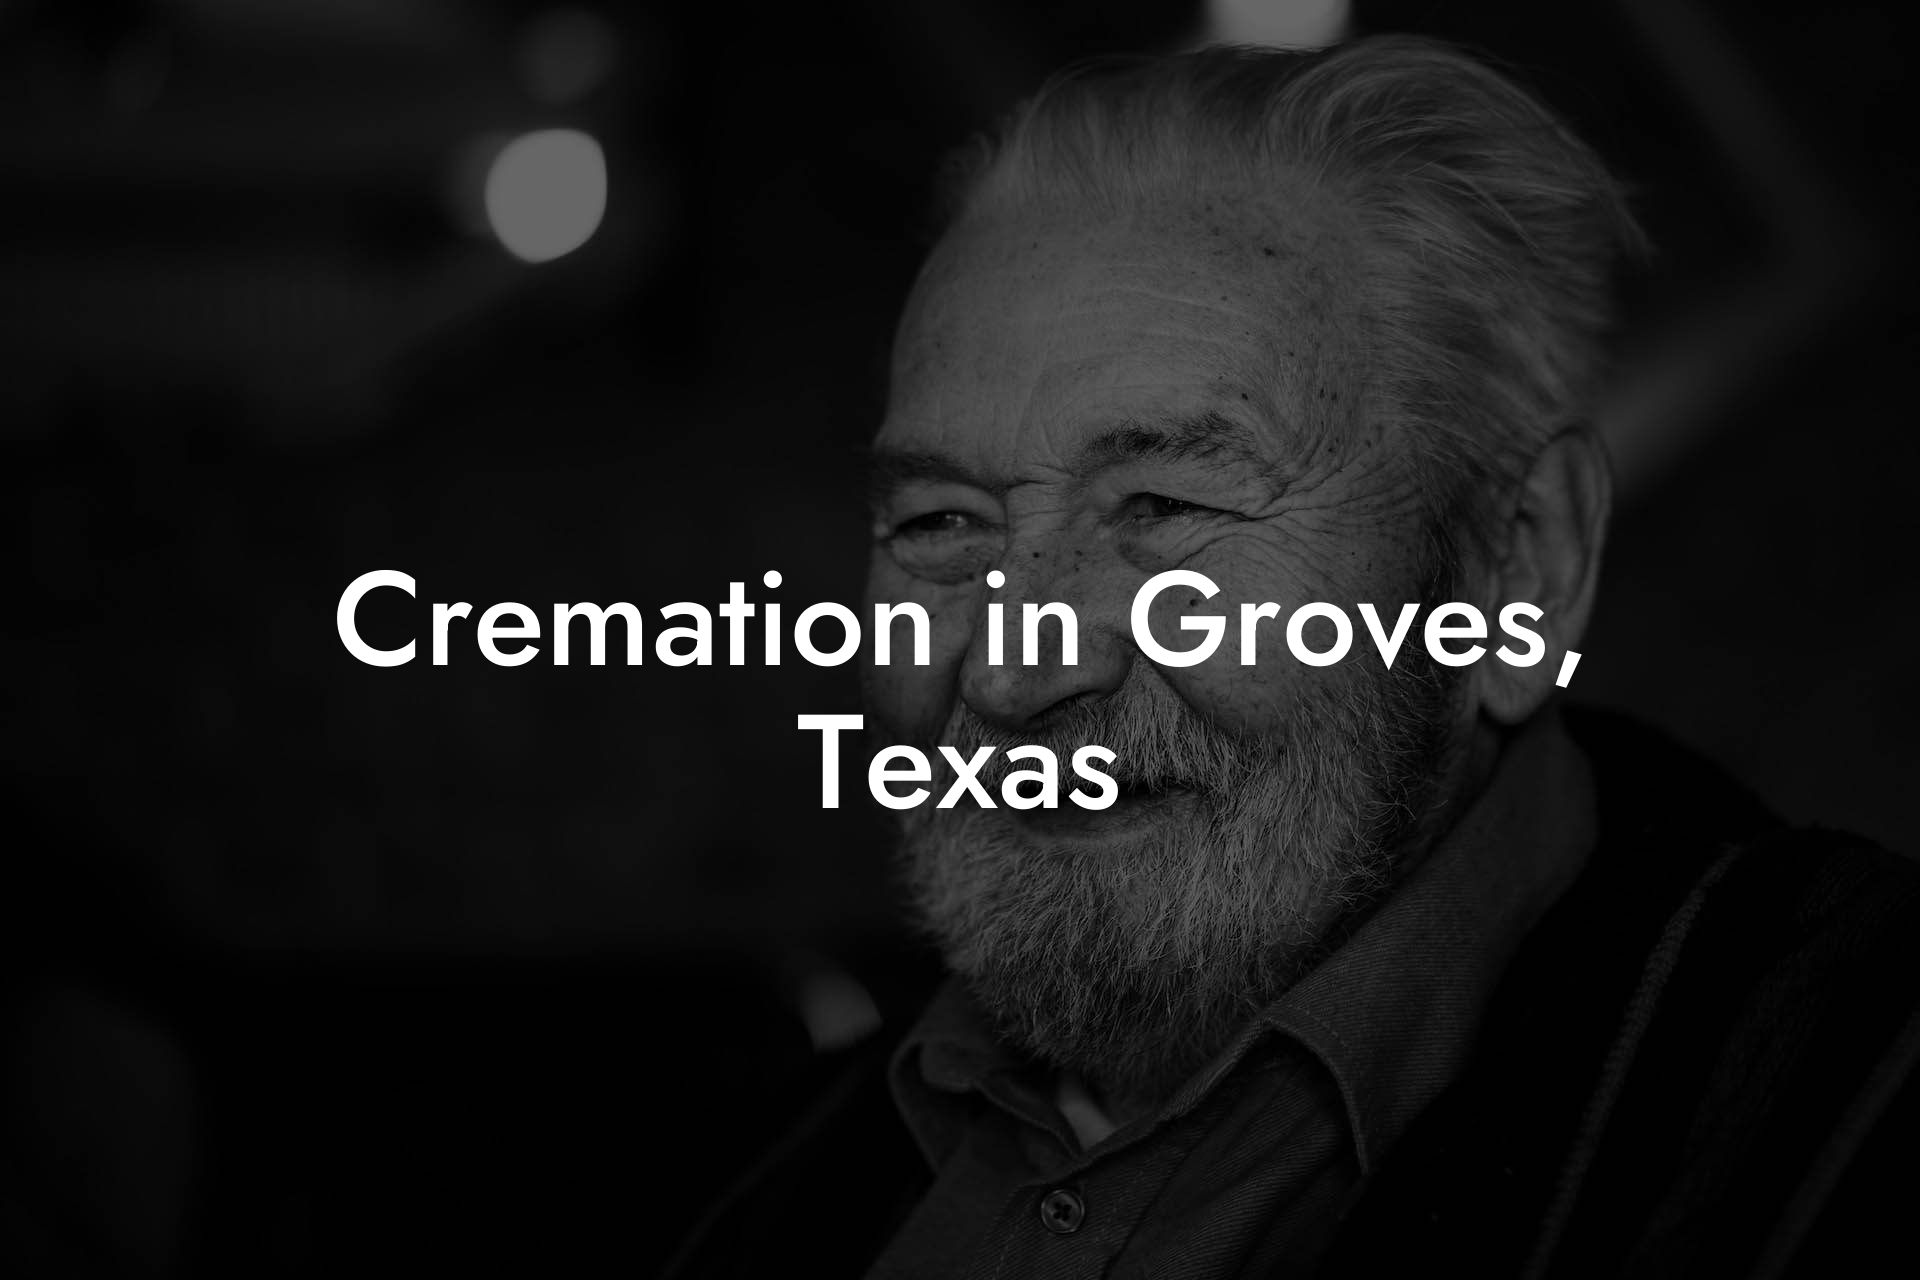 Cremation in Groves, Texas